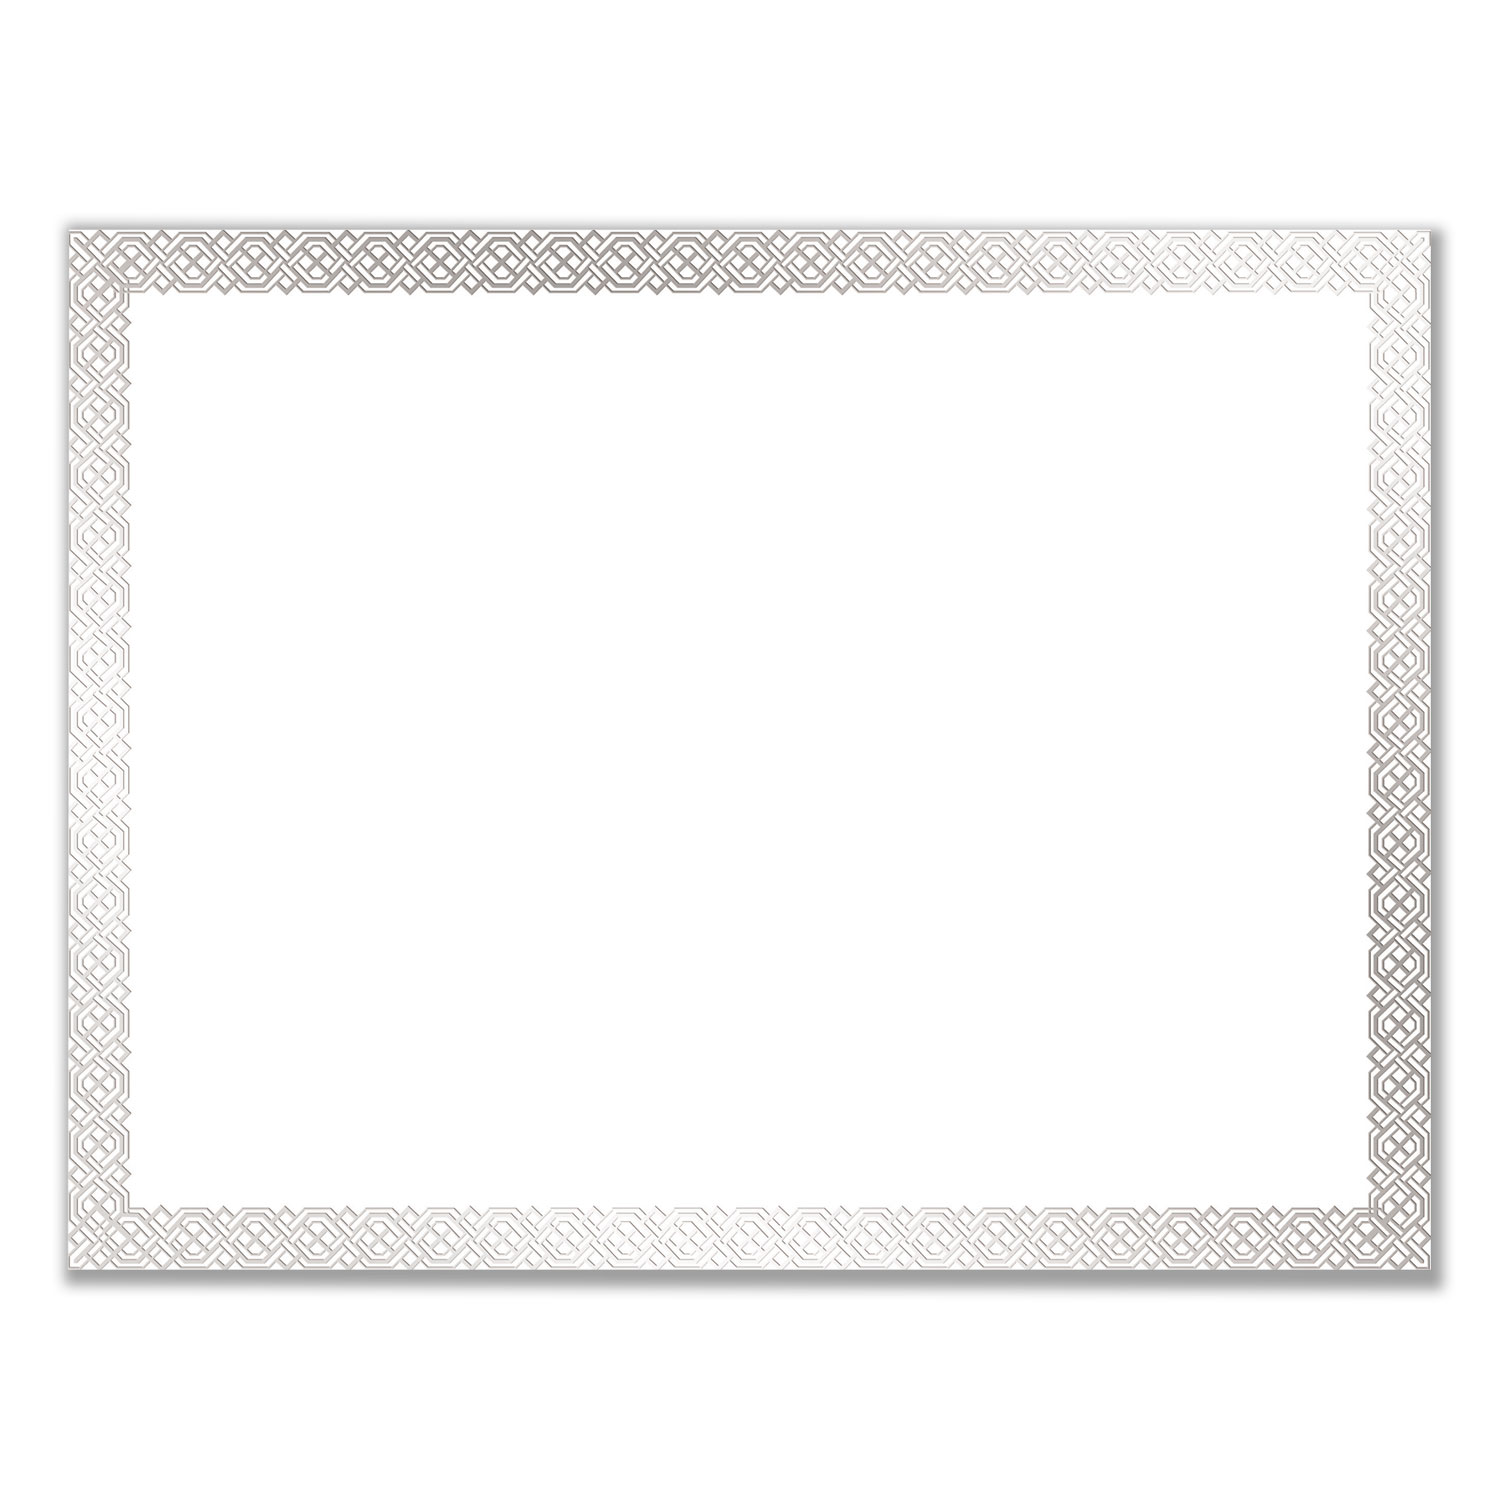 Foil Border Certificates, 8.5 x 11, White/Silver with Braided